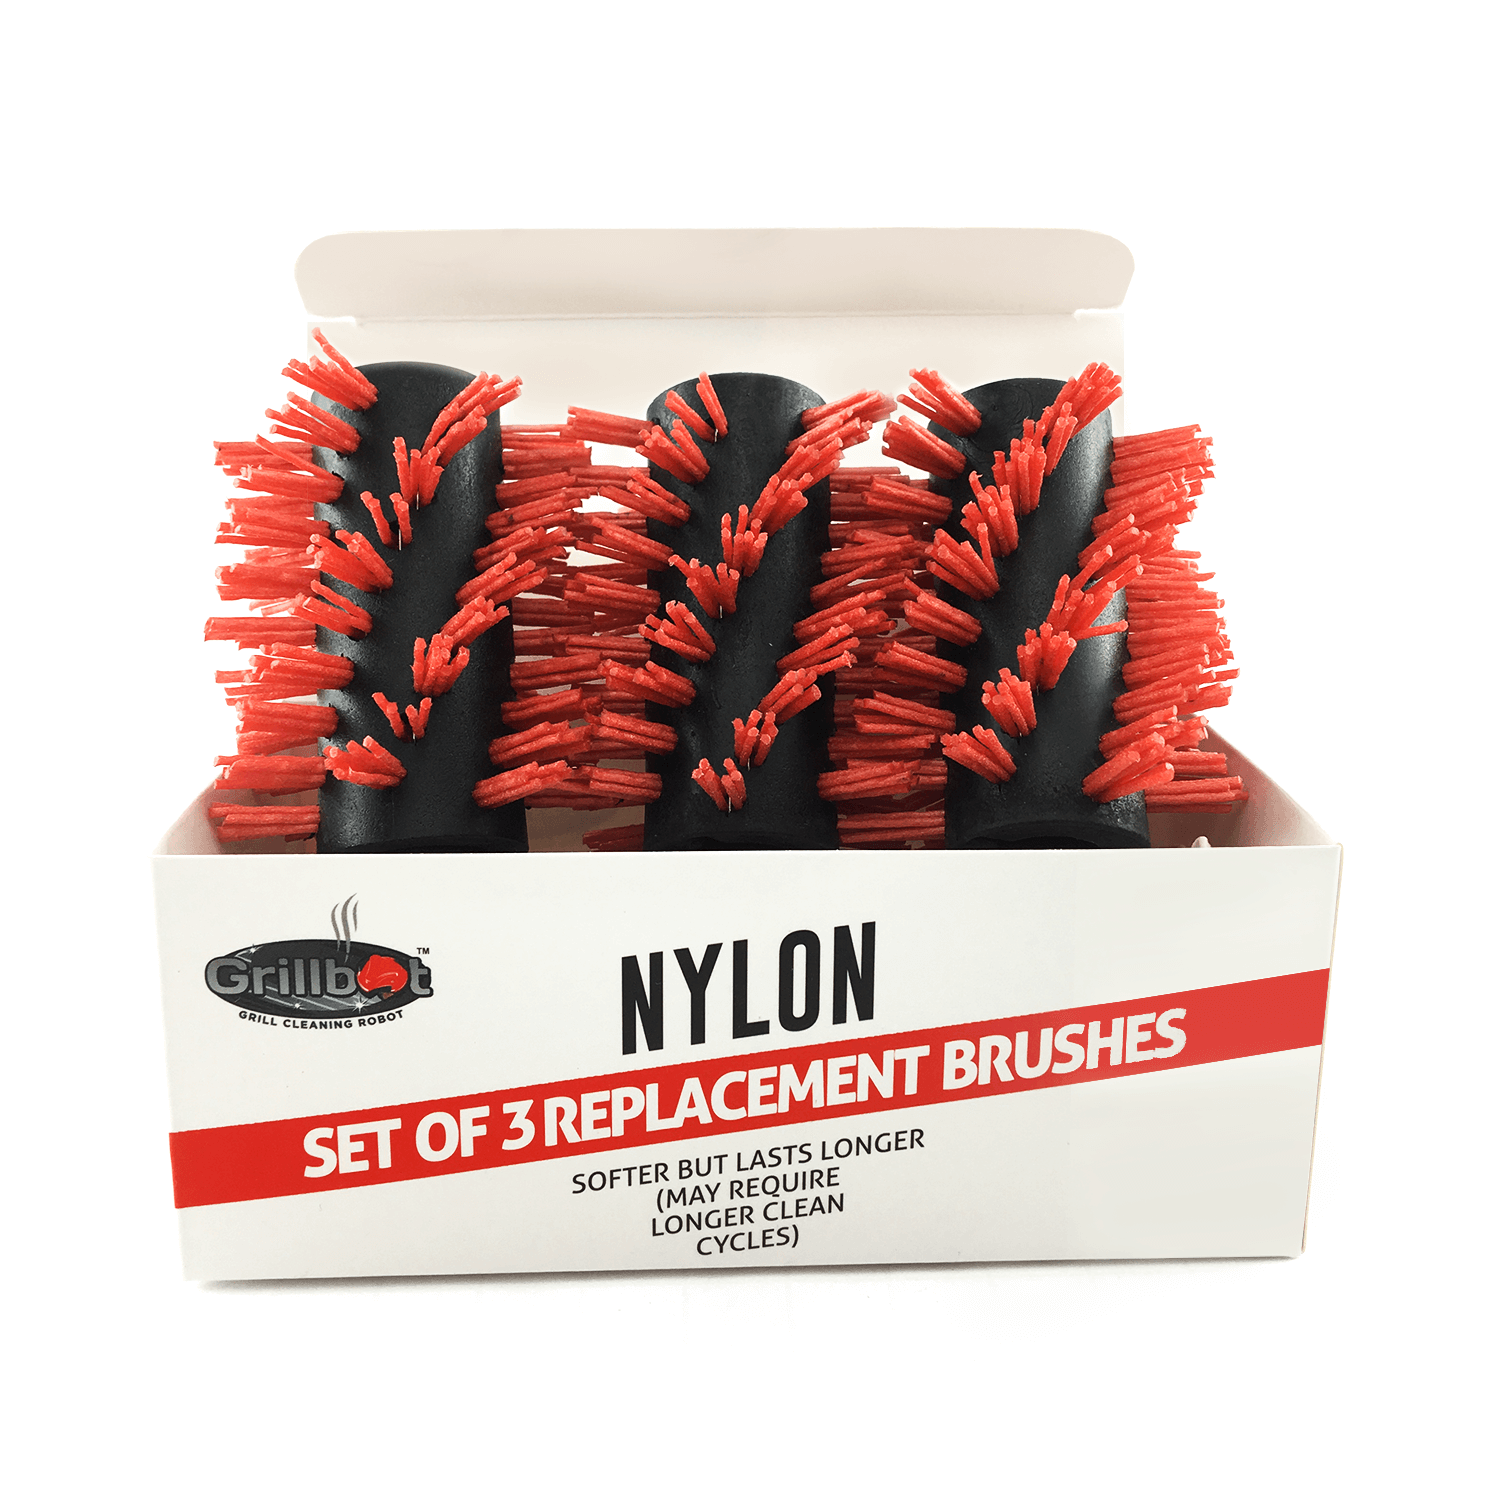 Grillbot - Nylon Replacement Brushes